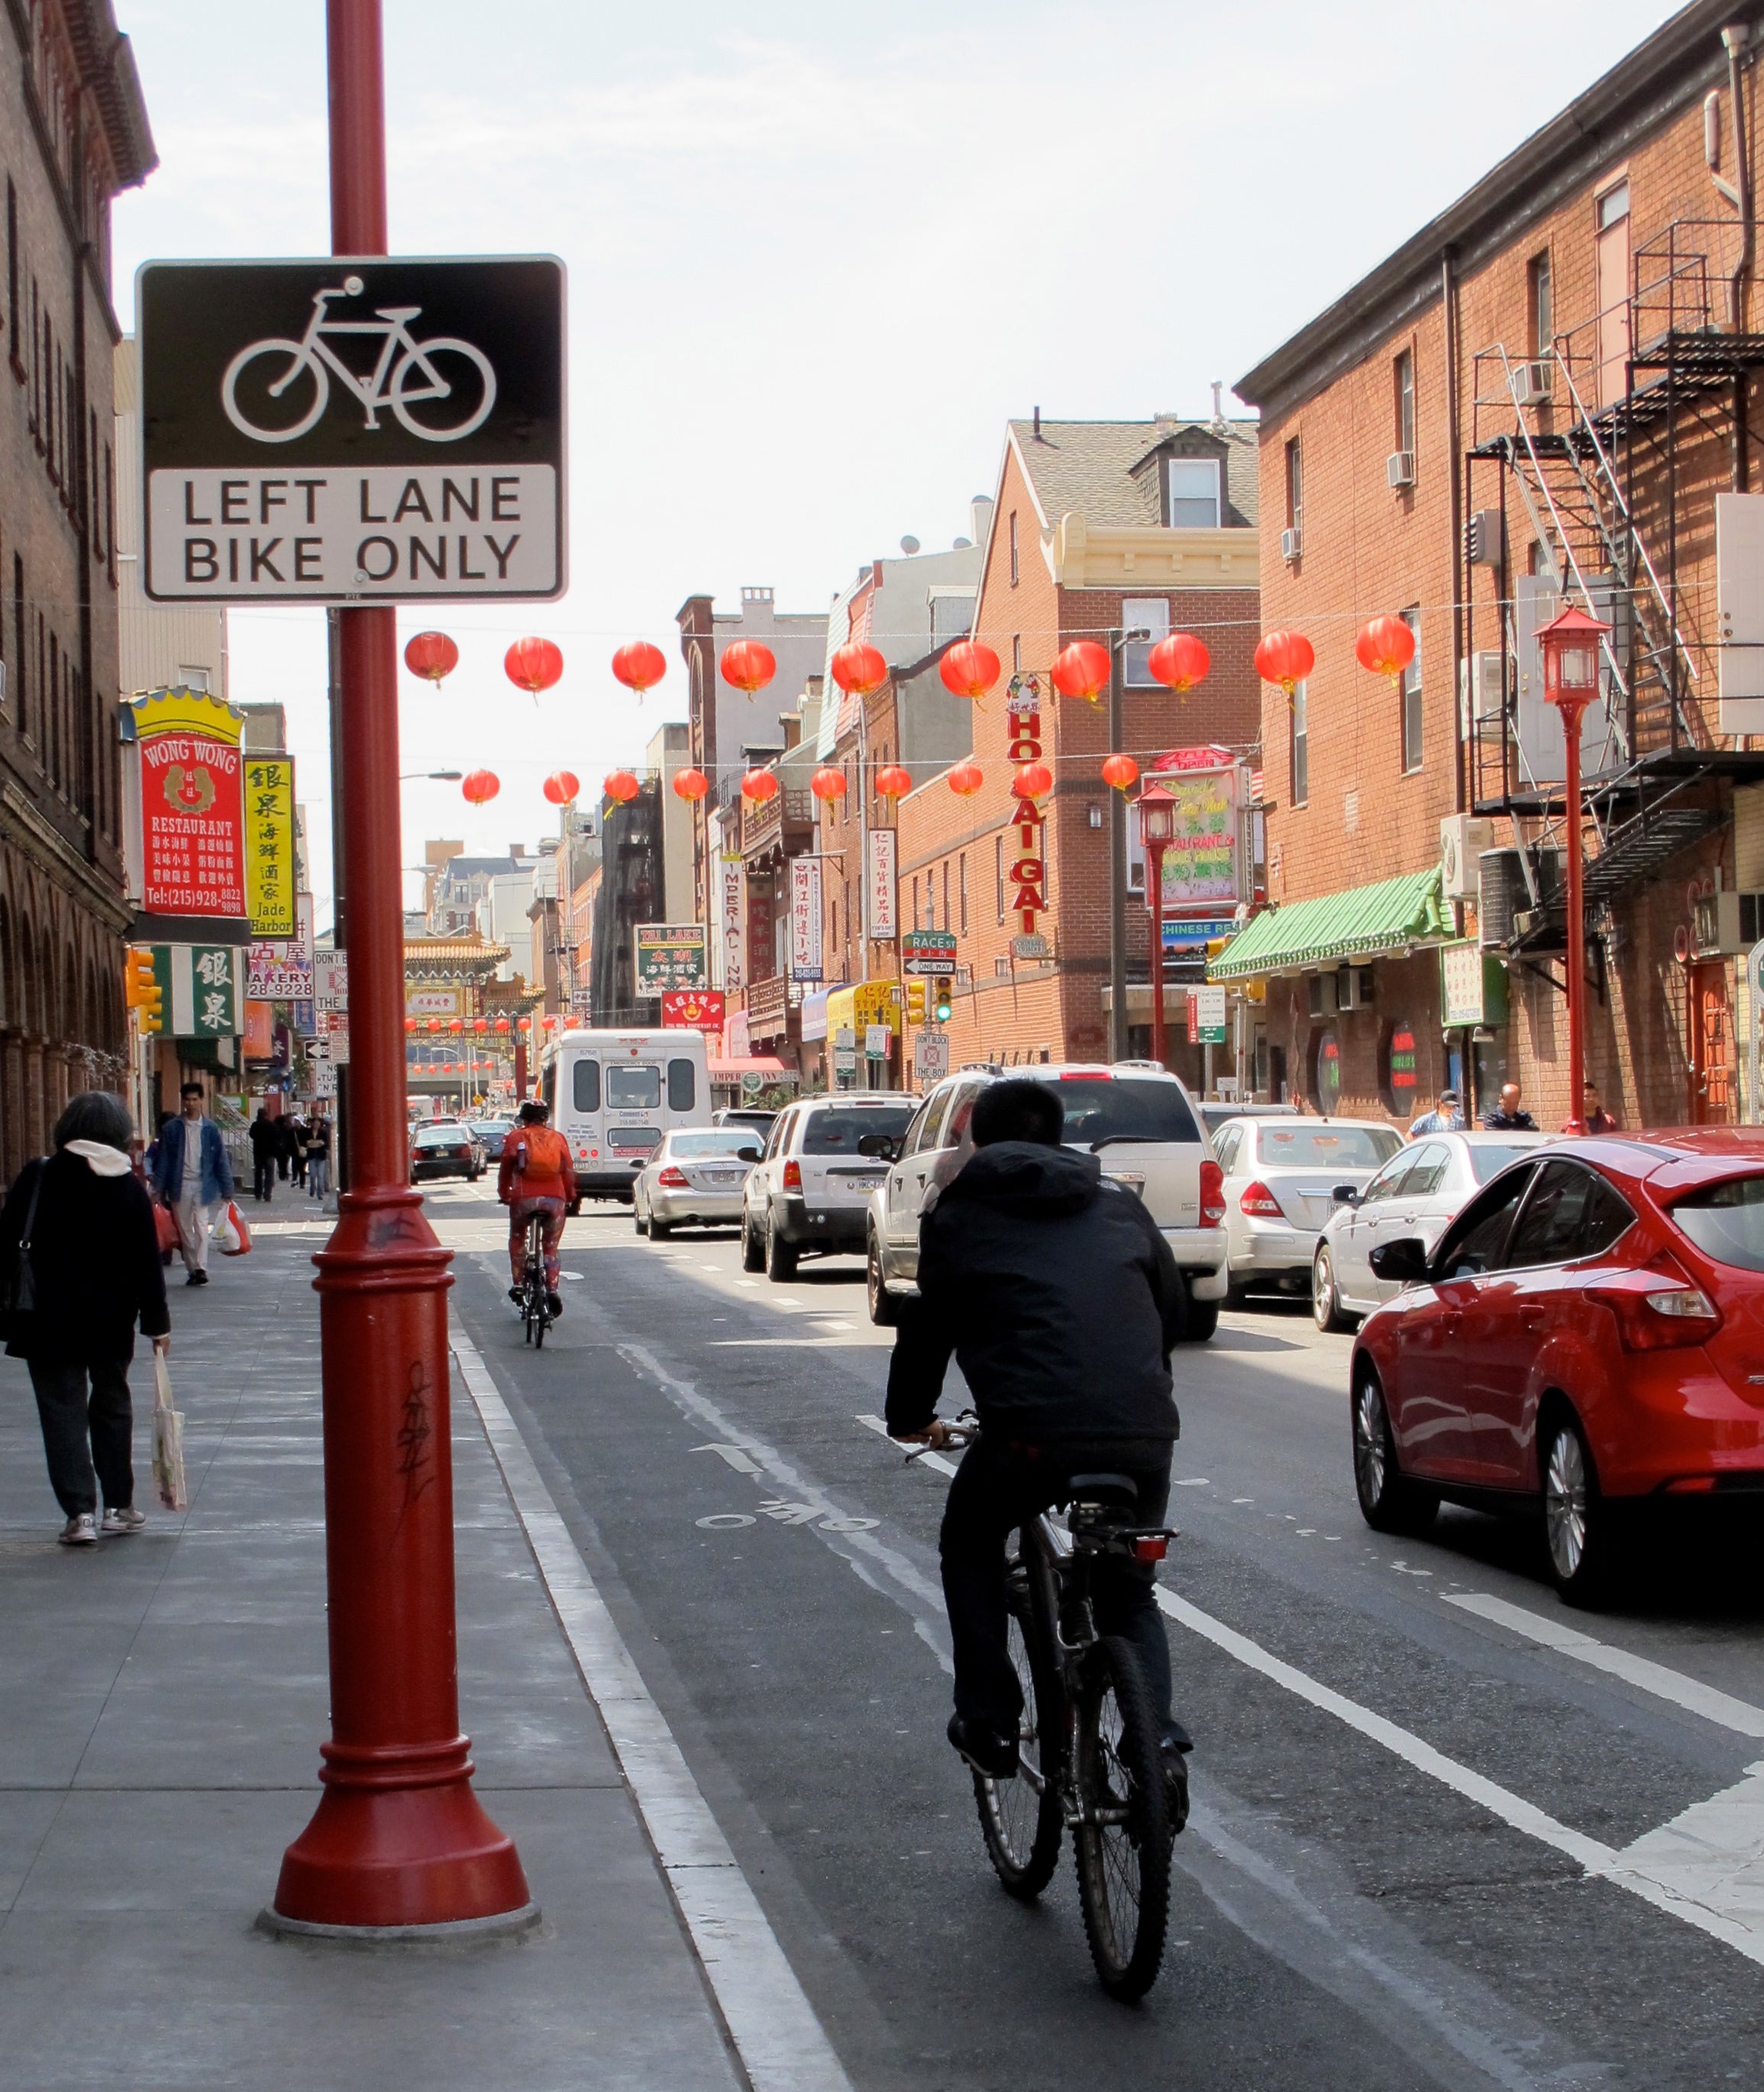 The 10th Street bike lane in Chinatown during its pilot phase.